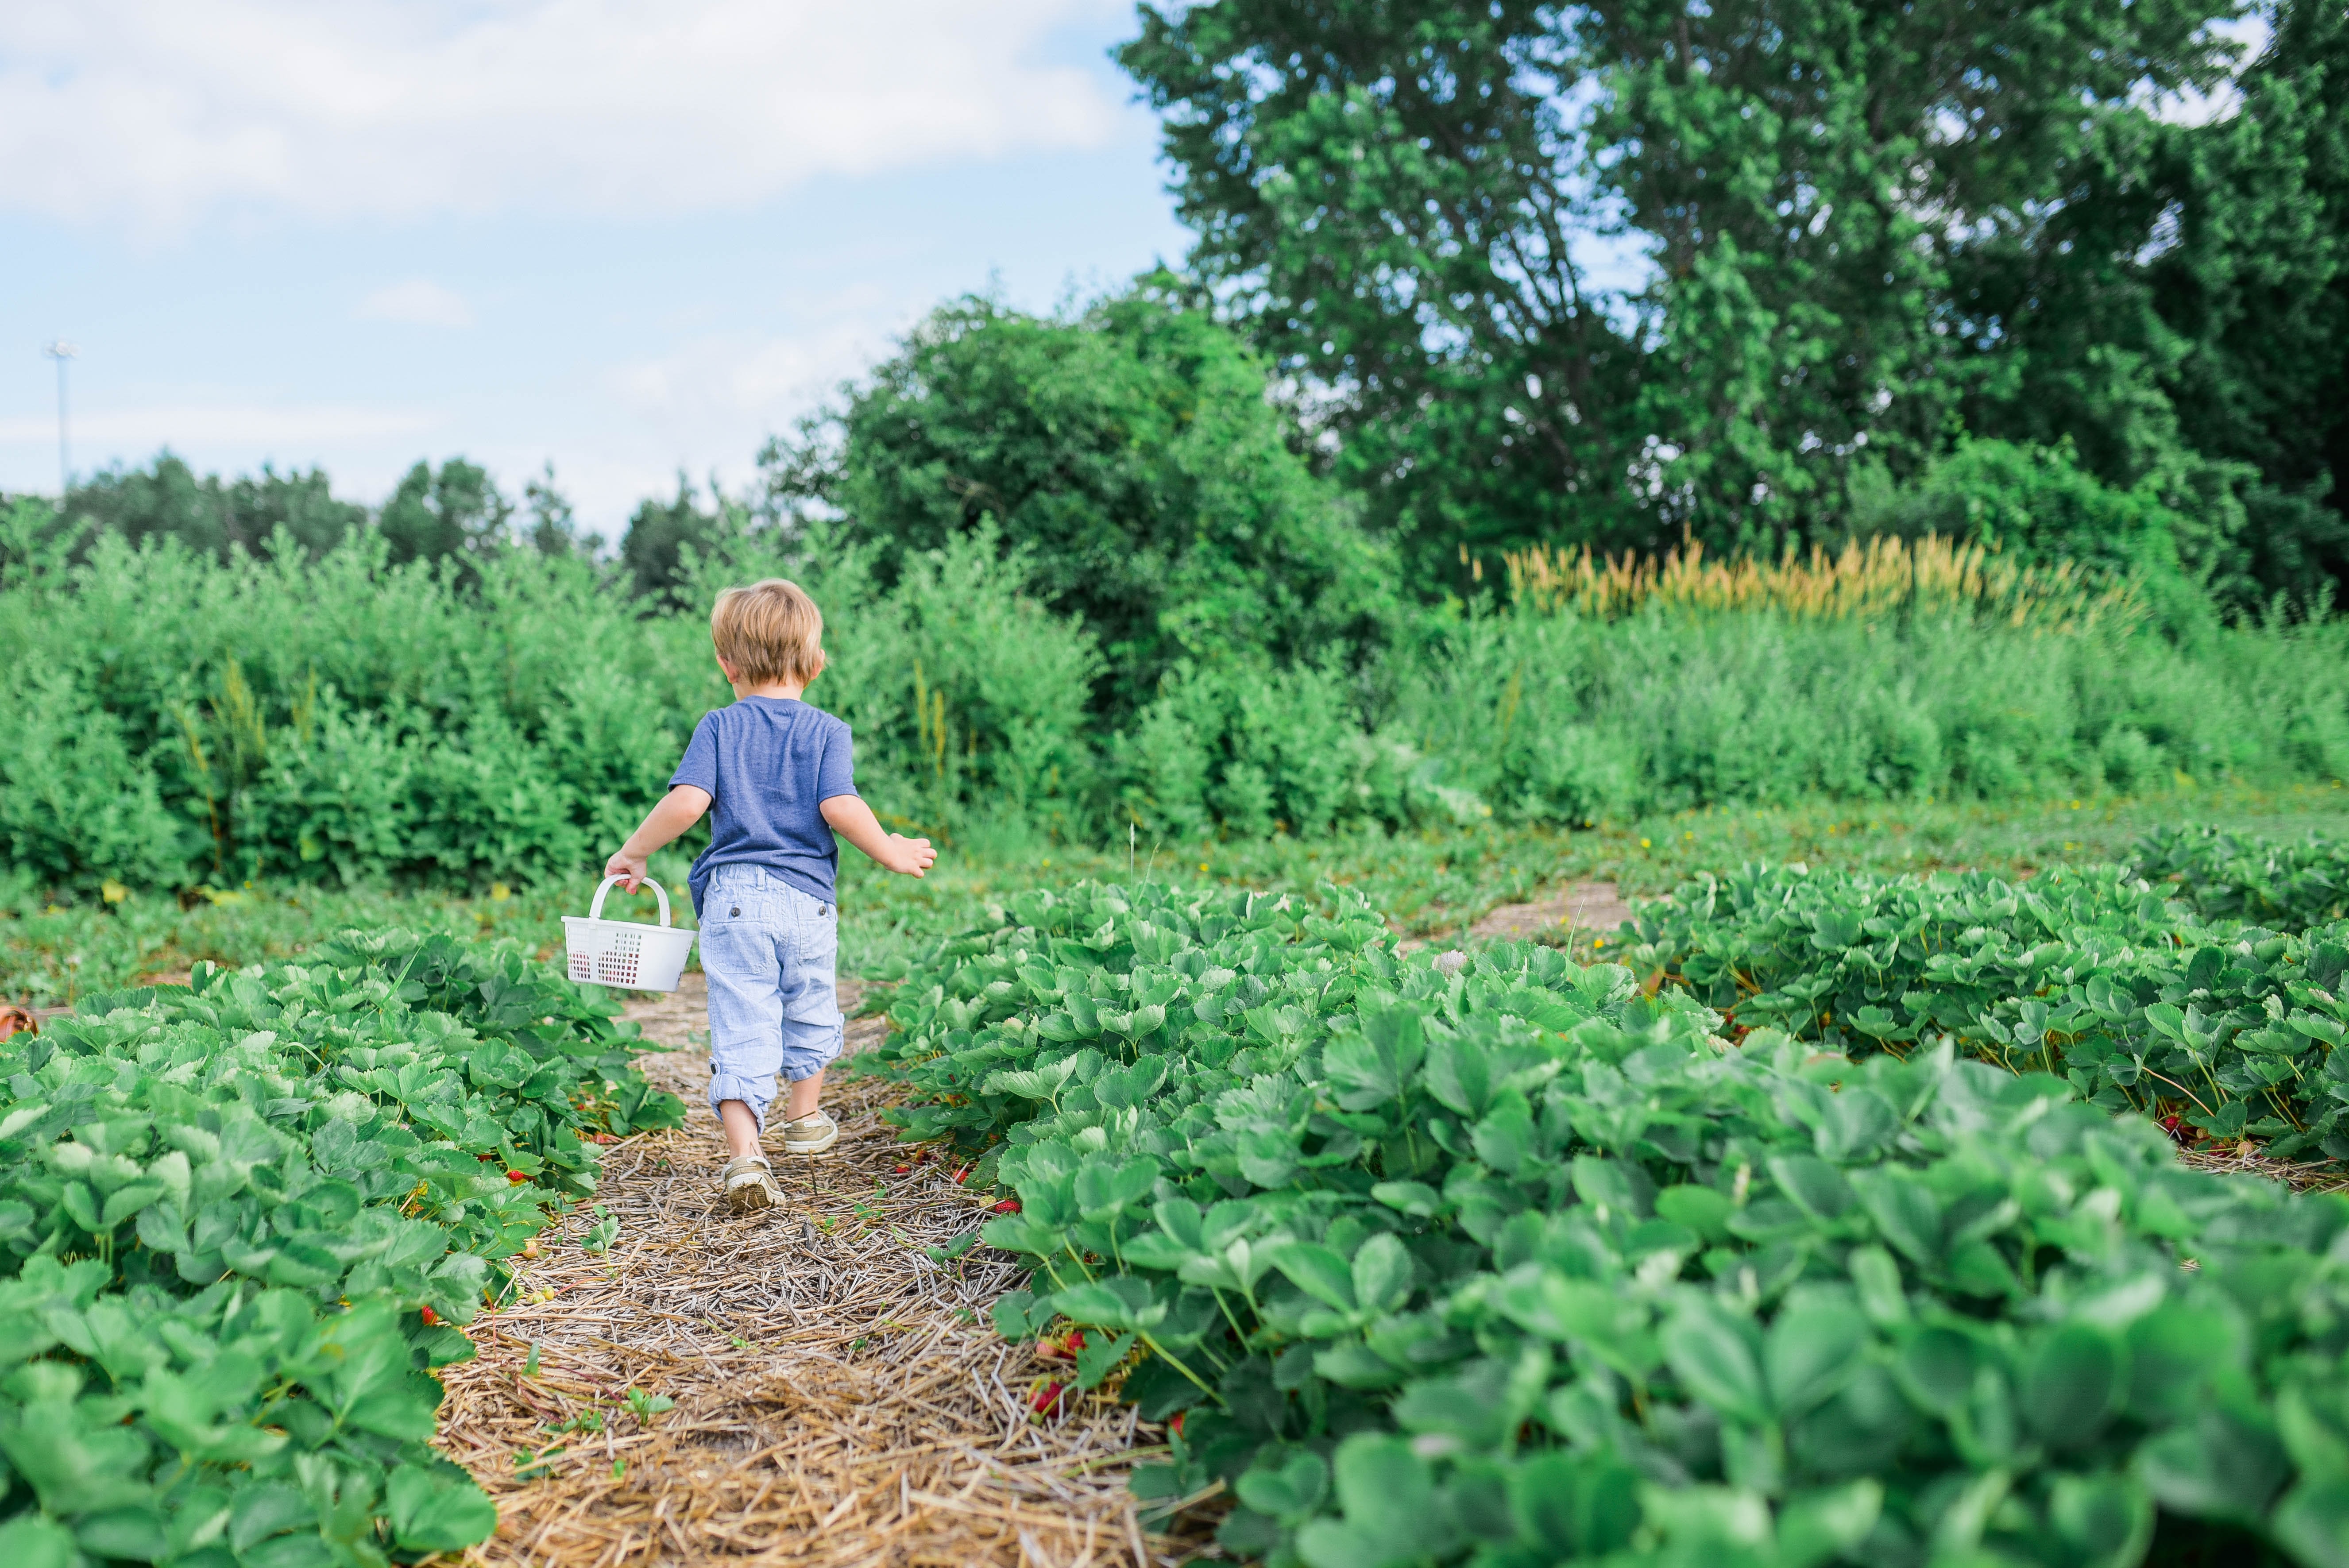 Pesticides near schools? Kids learning to garden? Two related topics!